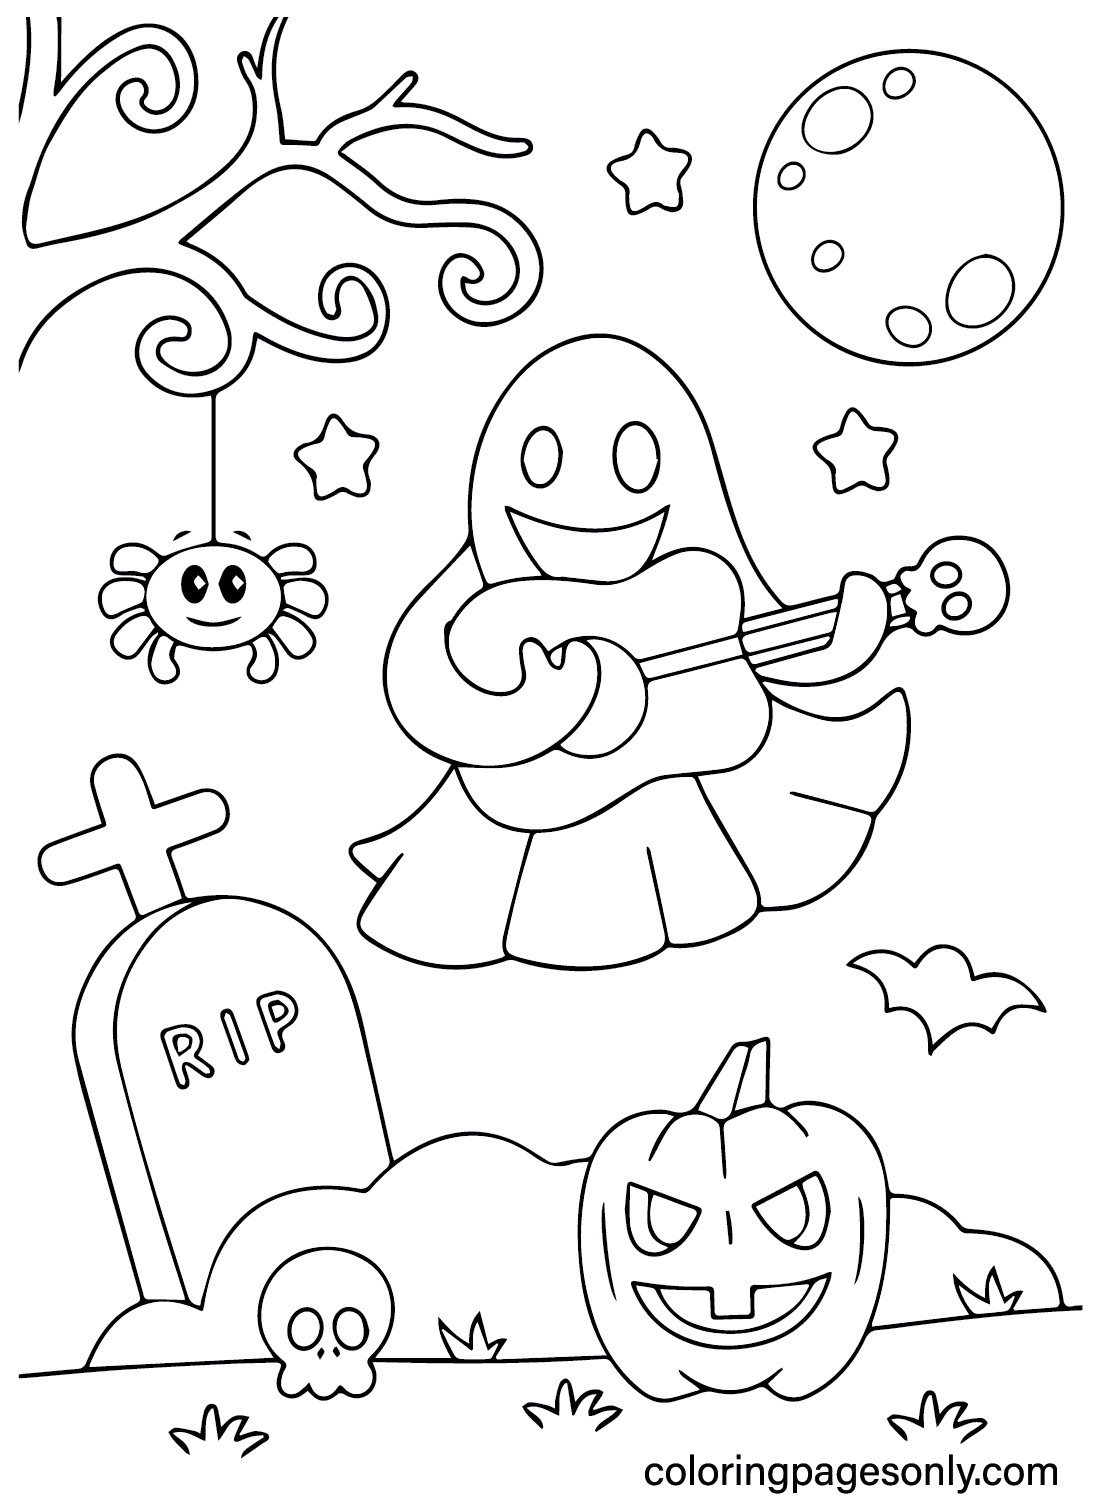 Cute Happy Halloween Coloring Page - Free Printable Coloring Pages